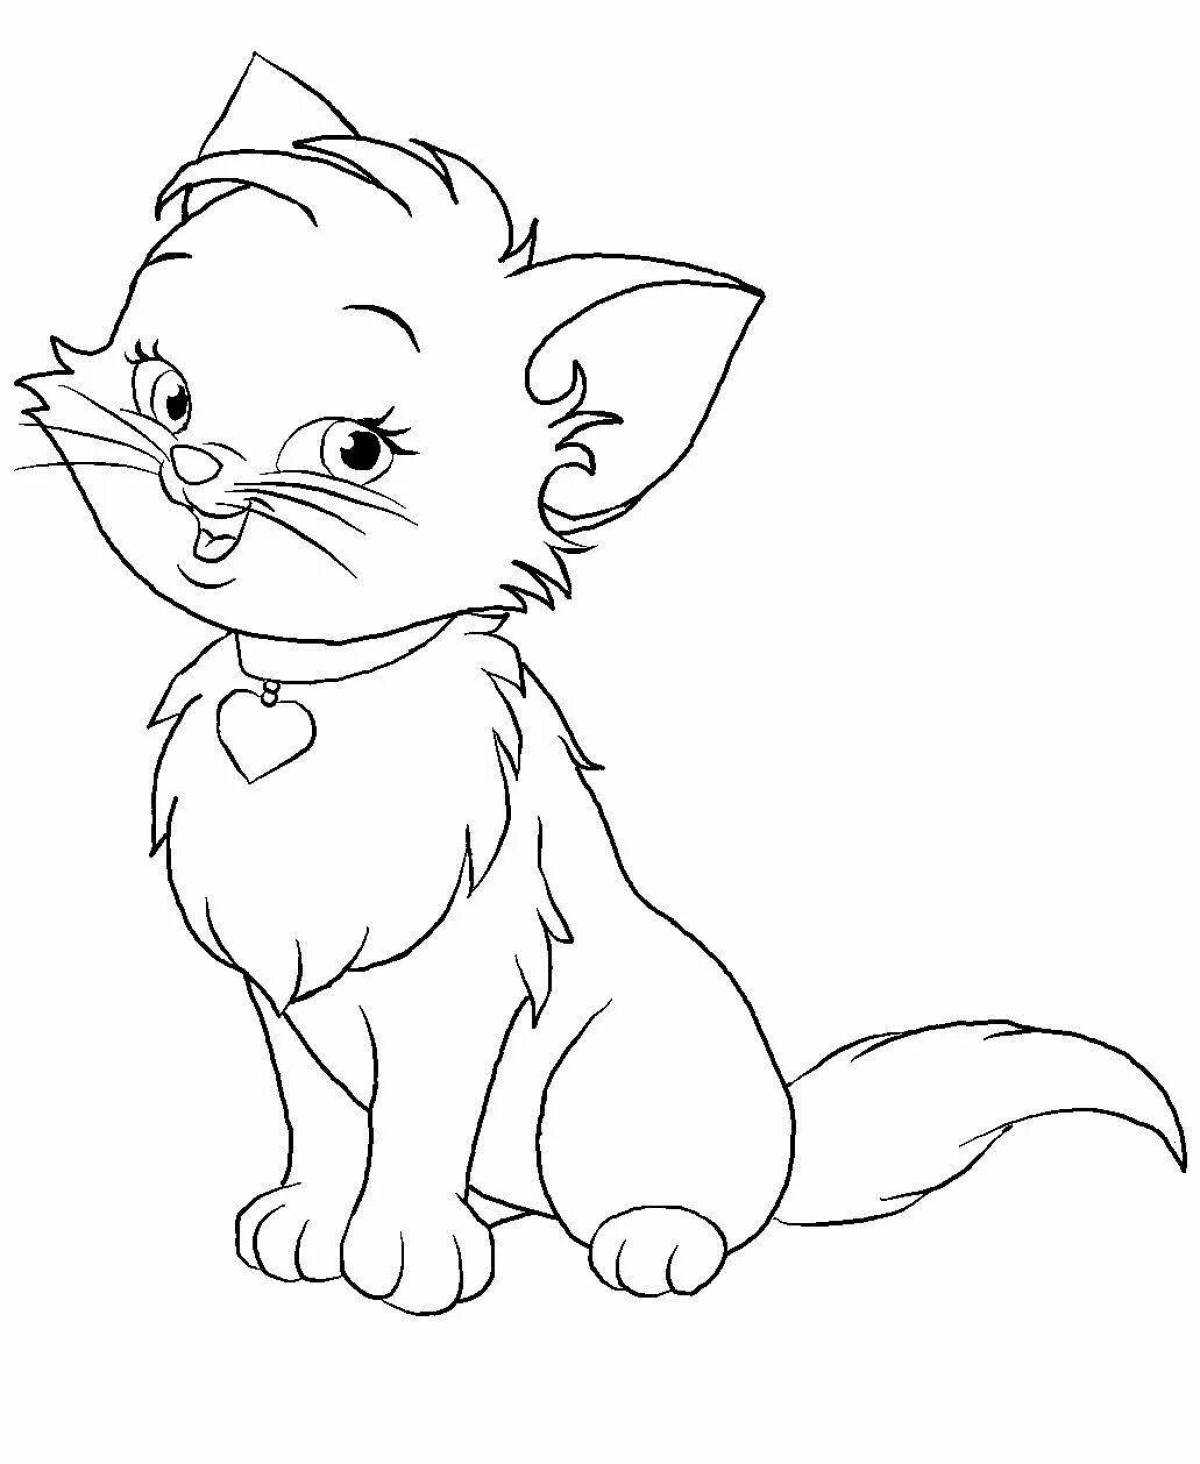 Sunny kitten coloring page